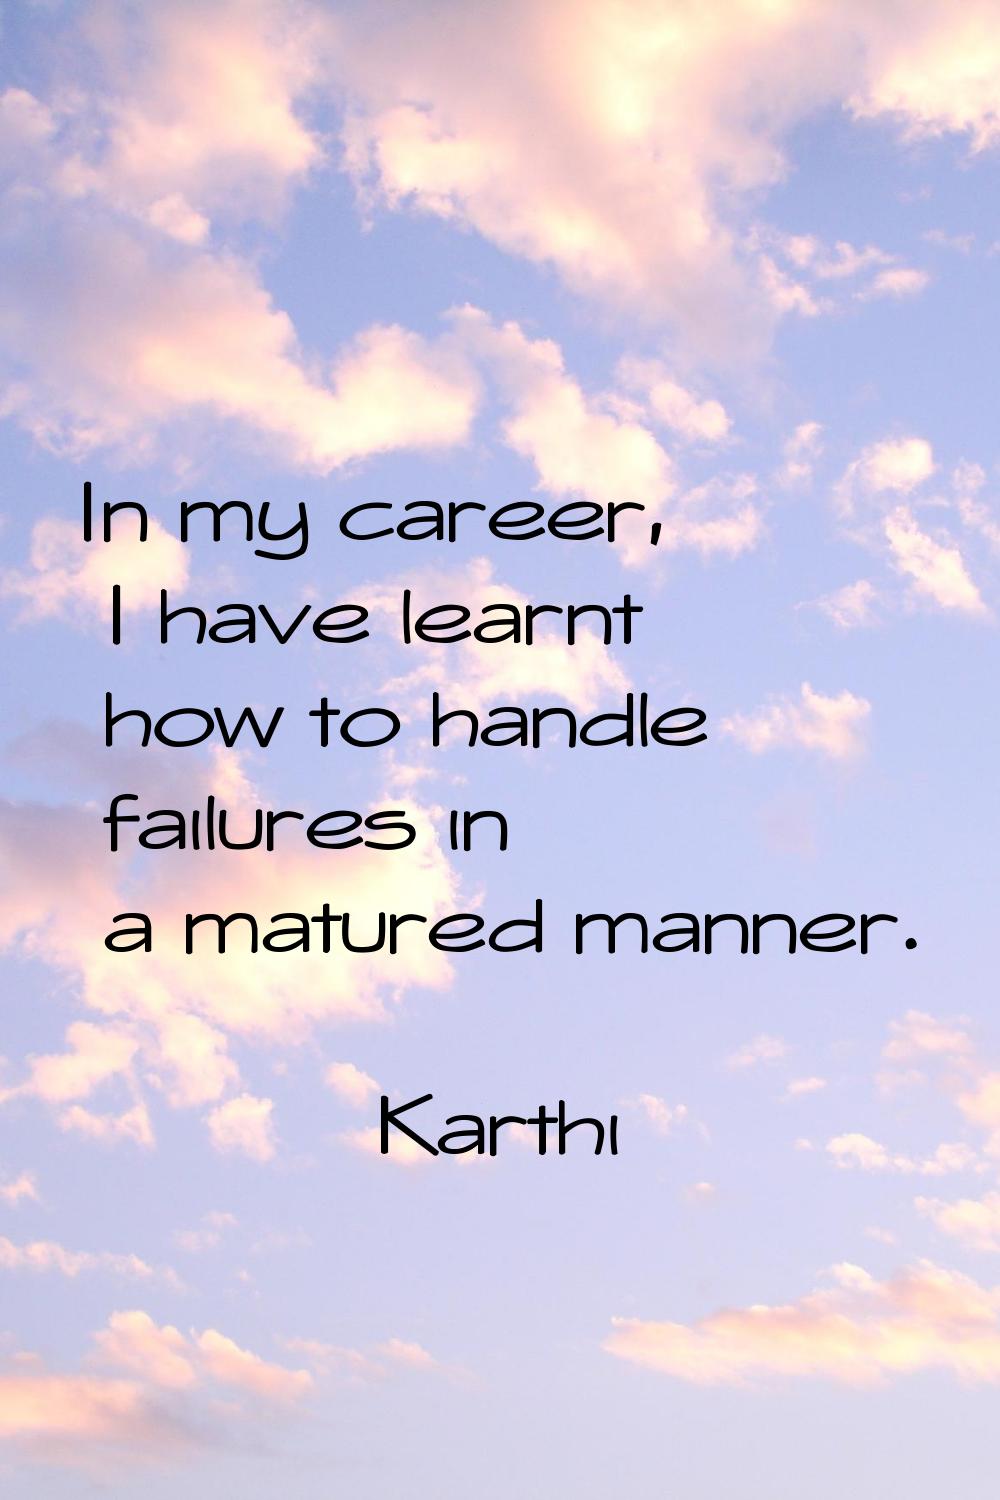 In my career, I have learnt how to handle failures in a matured manner.